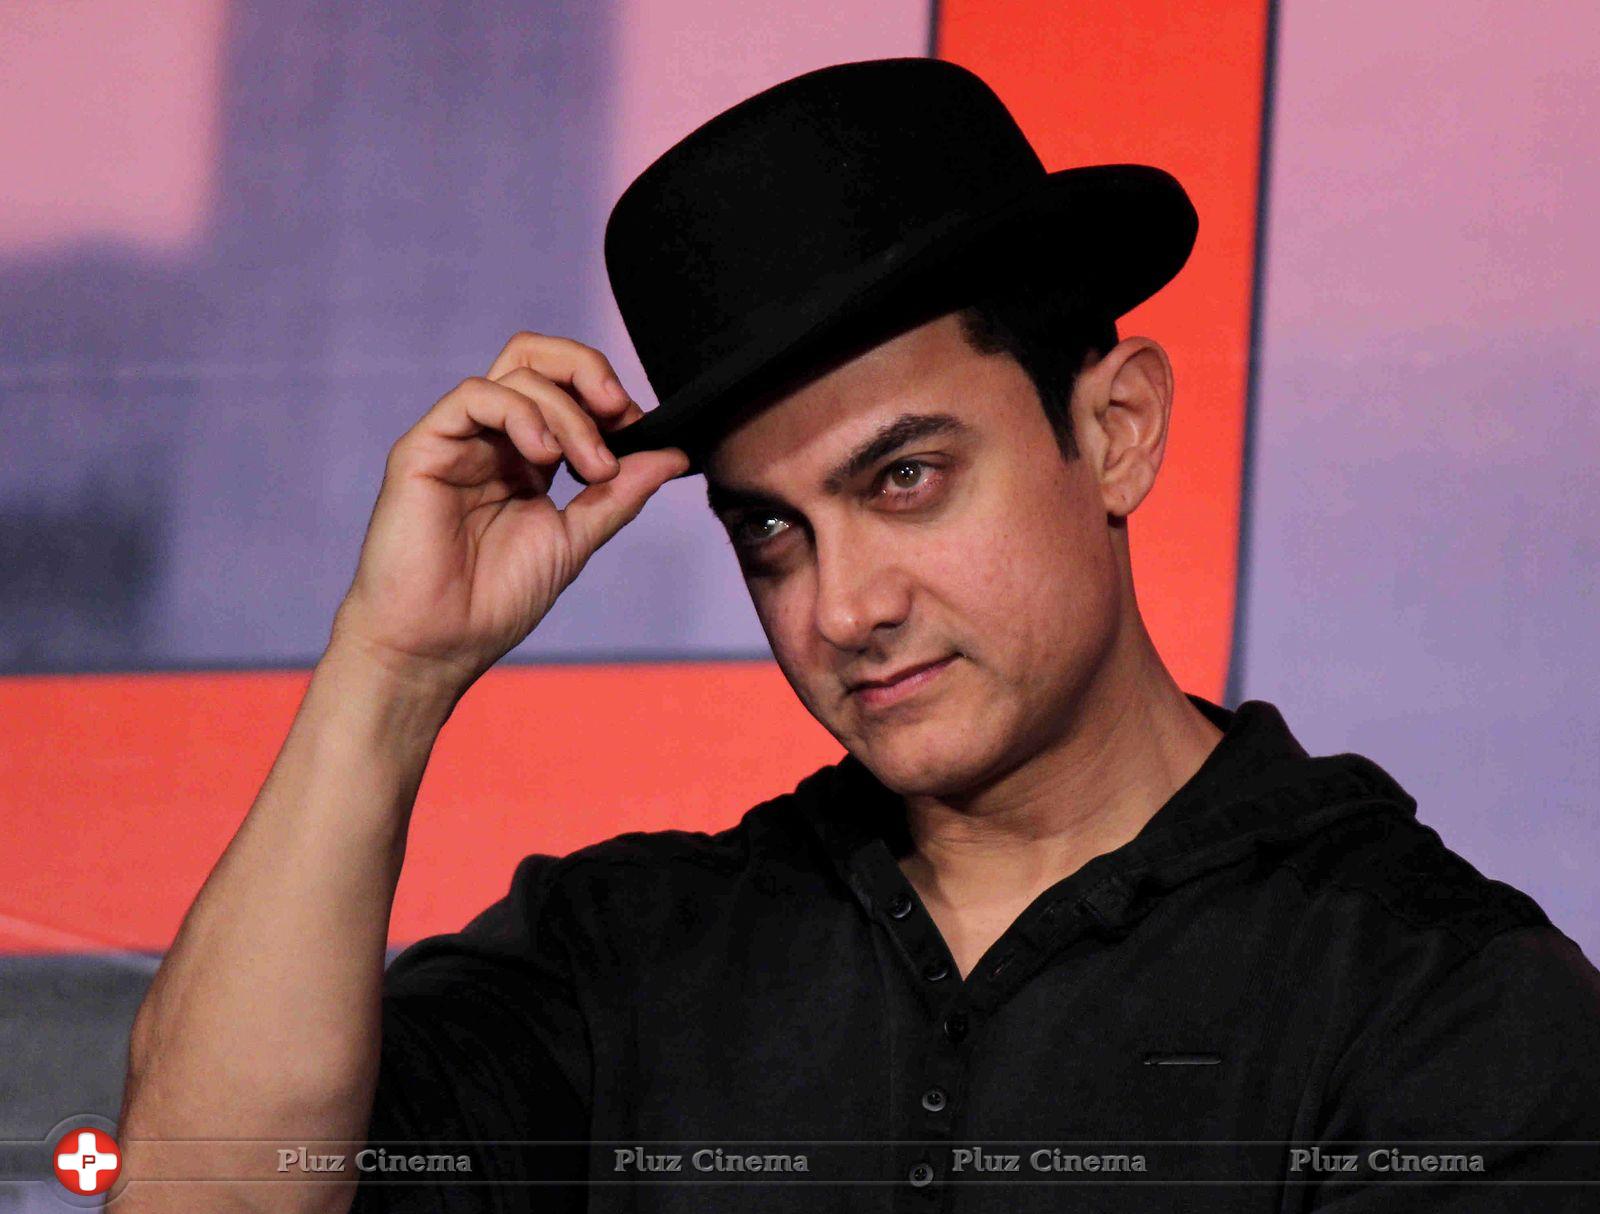 Aamir Khan - Dhoom 3 Movie Press Conference Photos | Picture 670929